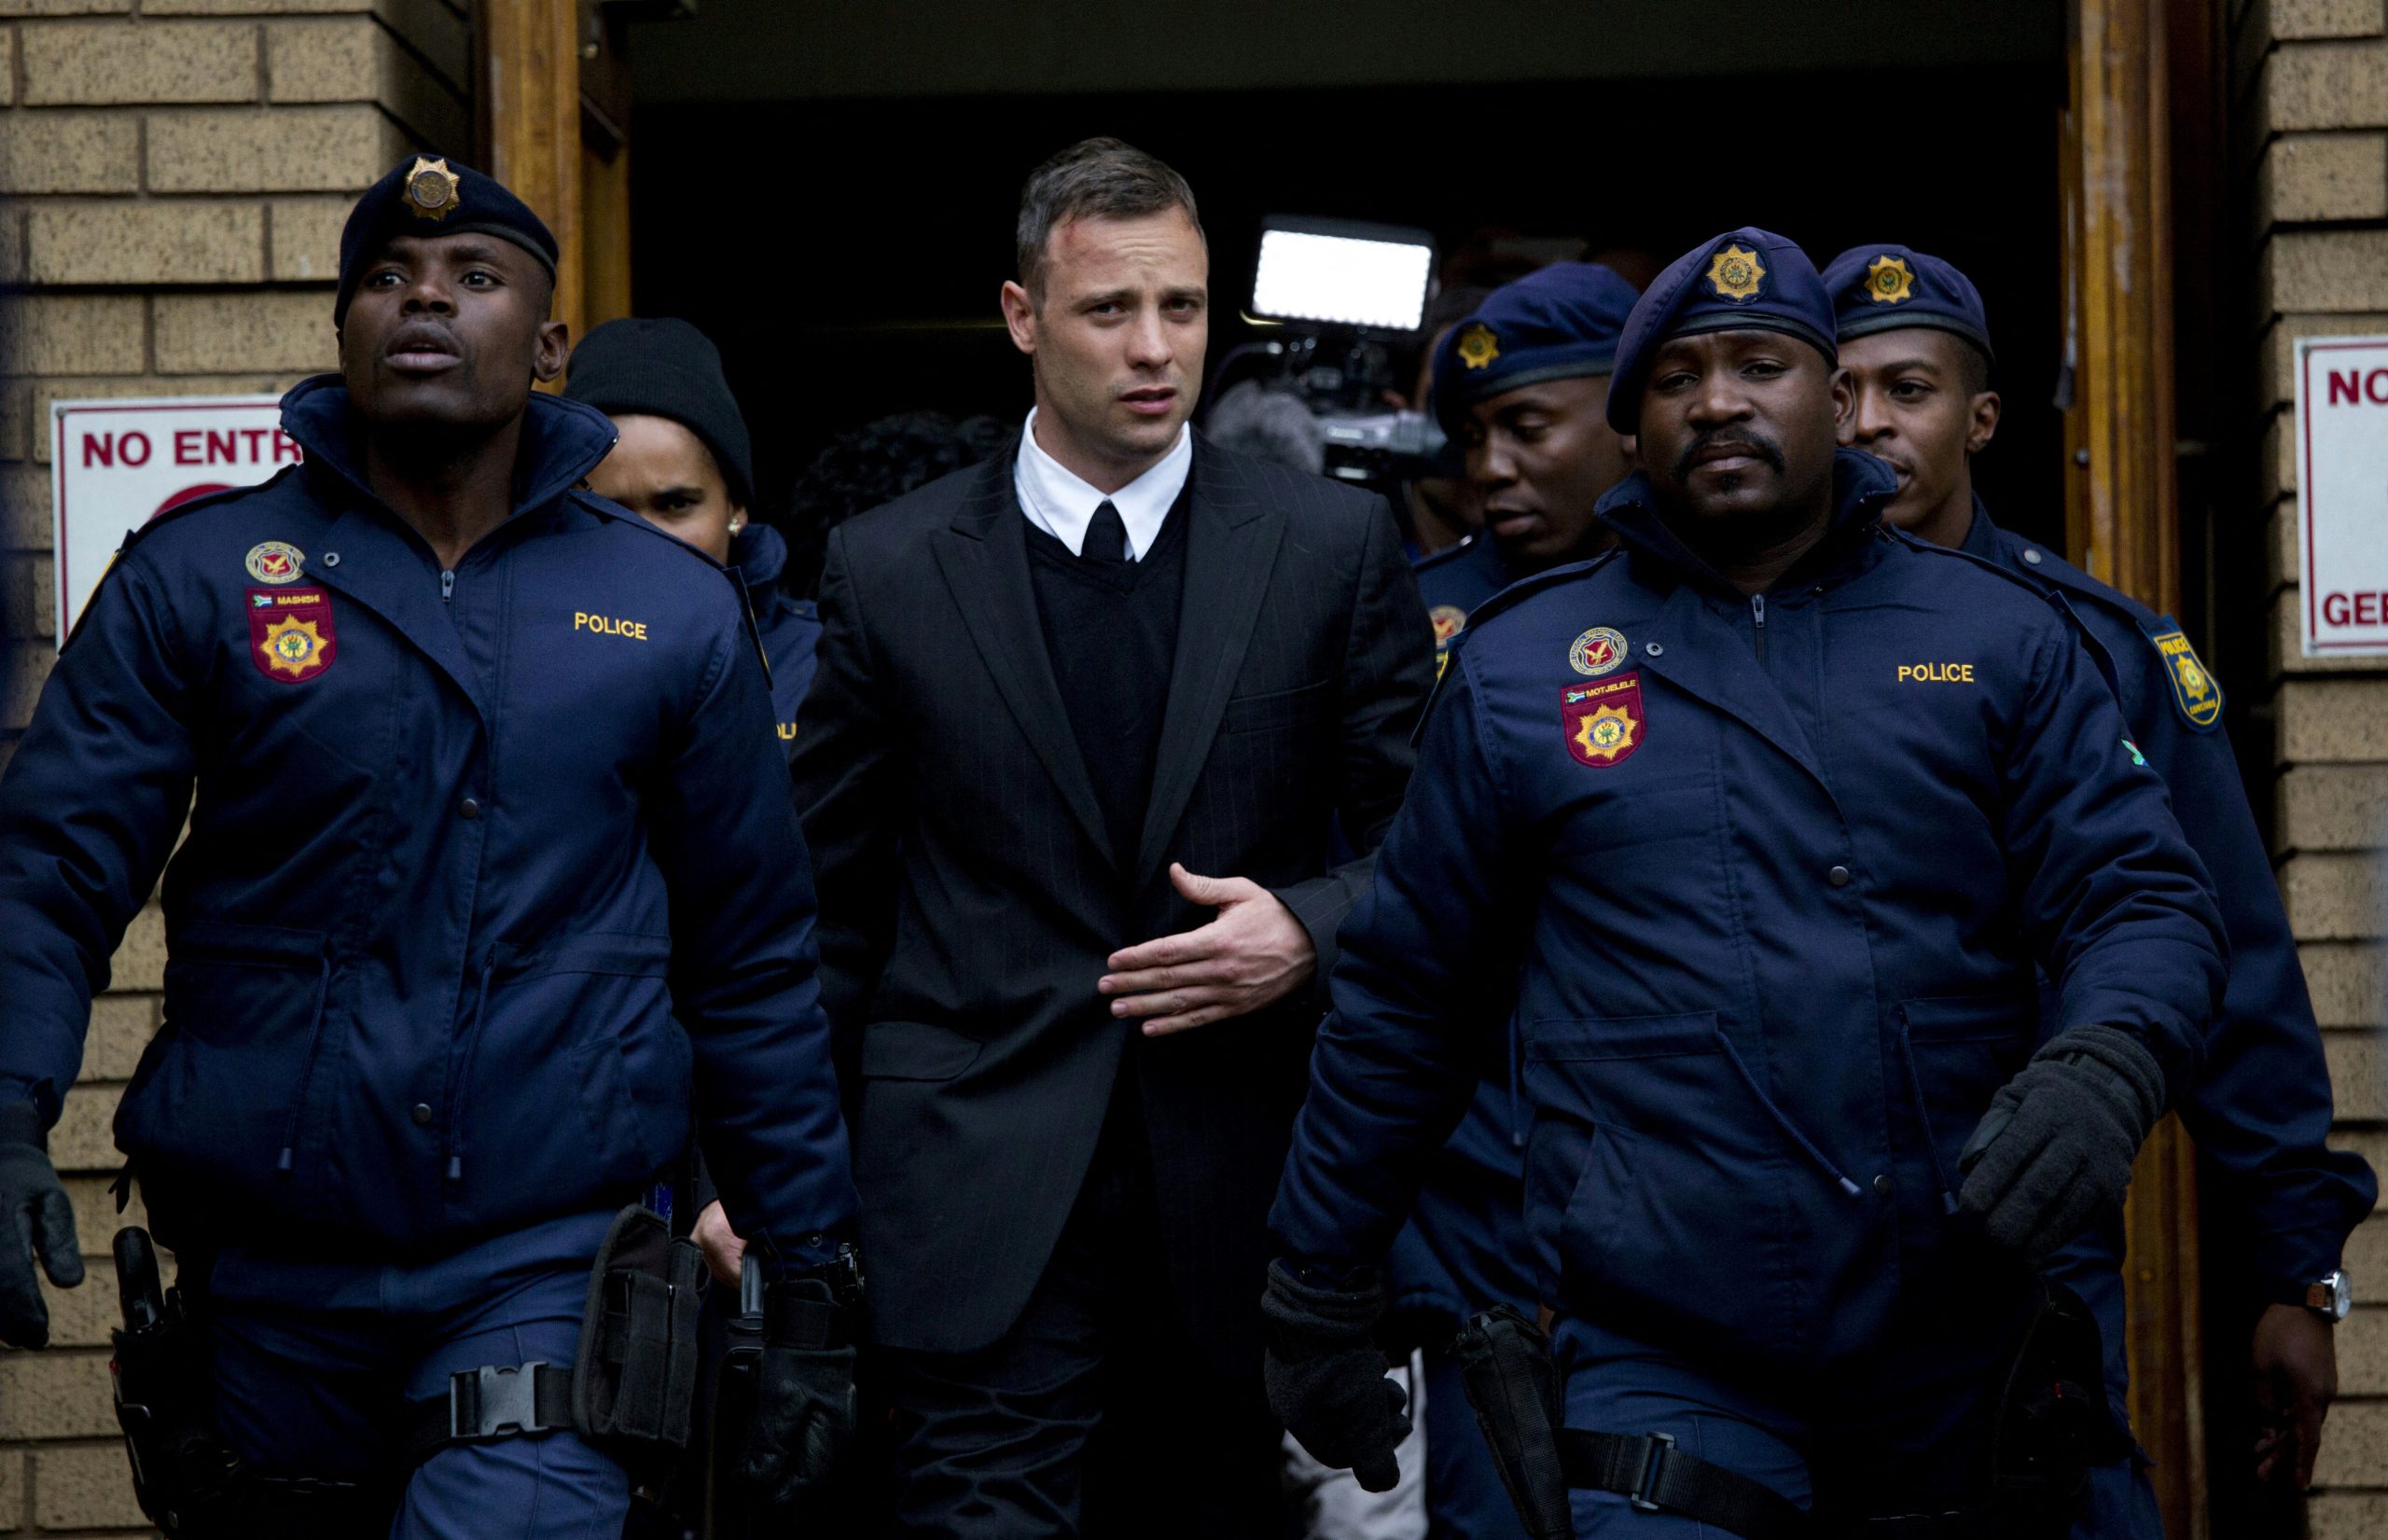 S.Africa’s ex-Olympic runner Oscar Pistorius released on parole 11 years after murdering girlfriend